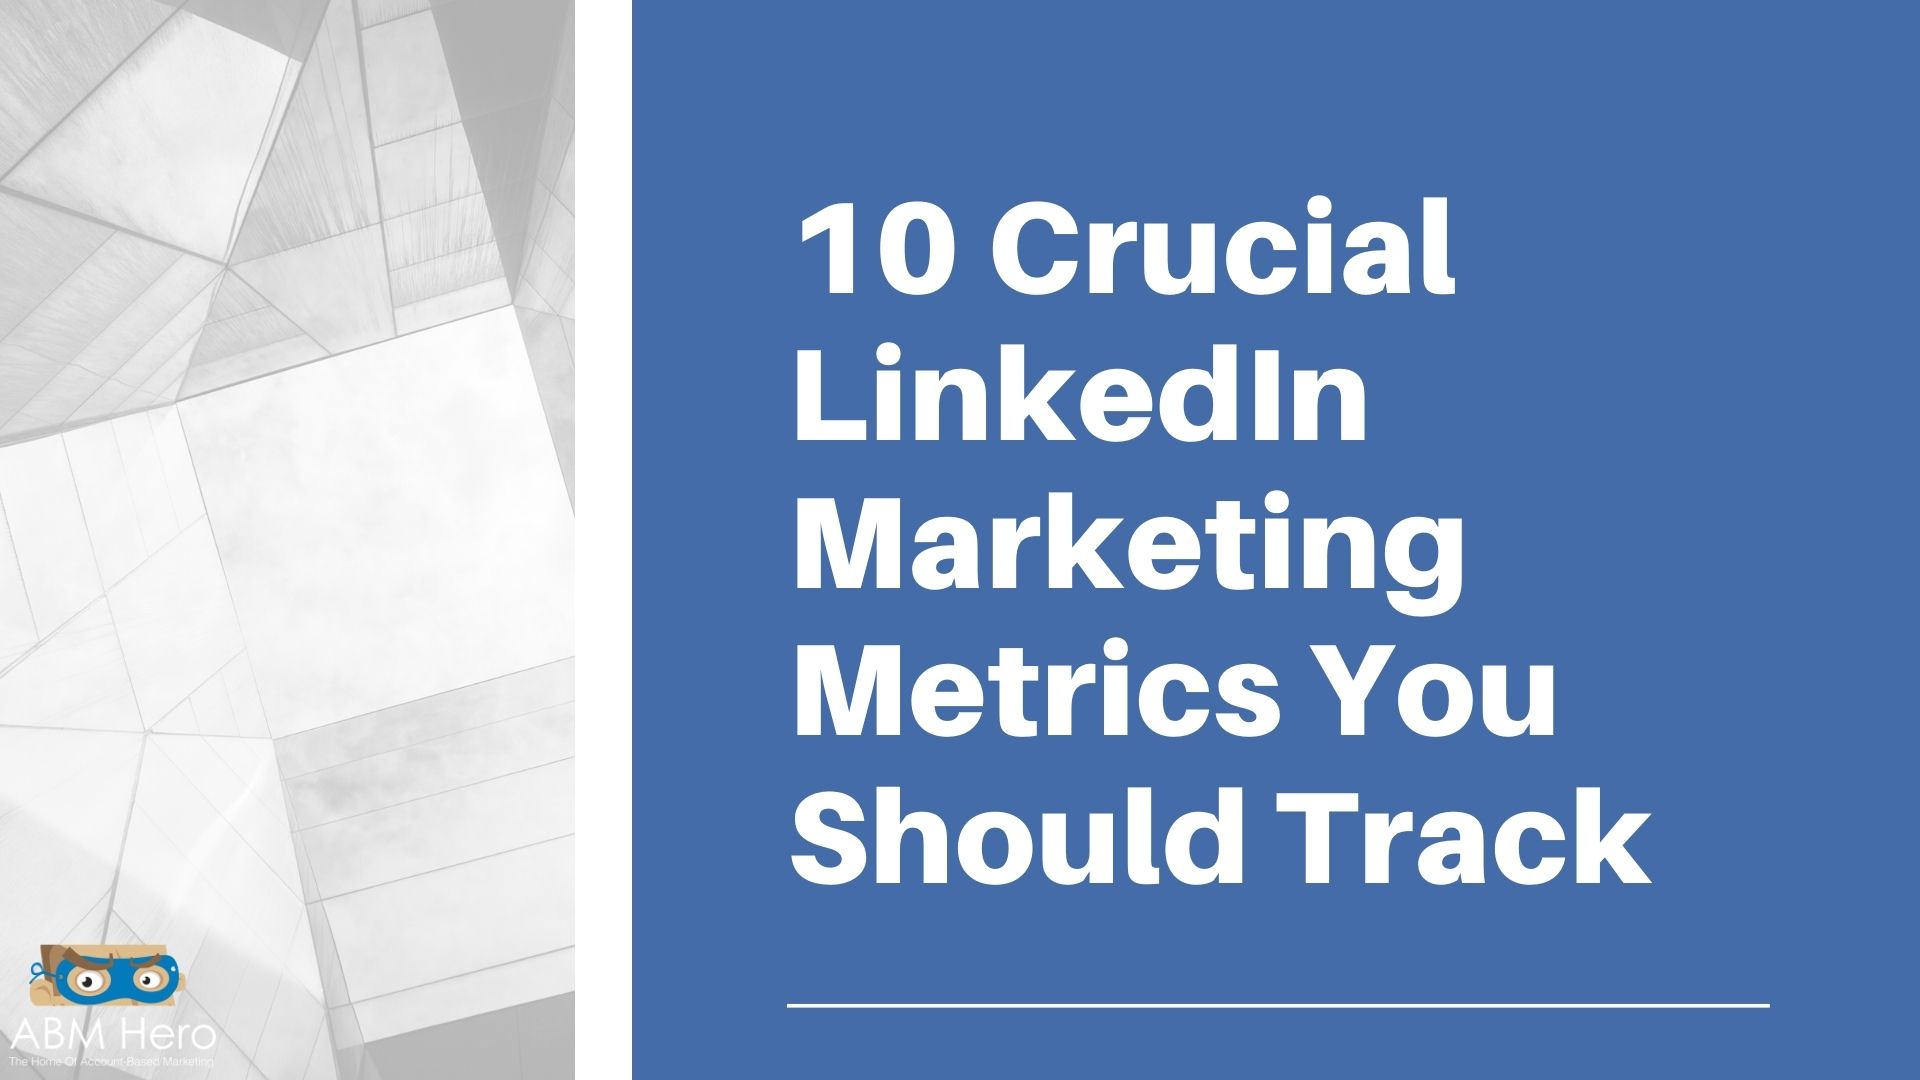 You are currently viewing 10 Crucial LinkedIn Marketing Metrics You Should Track